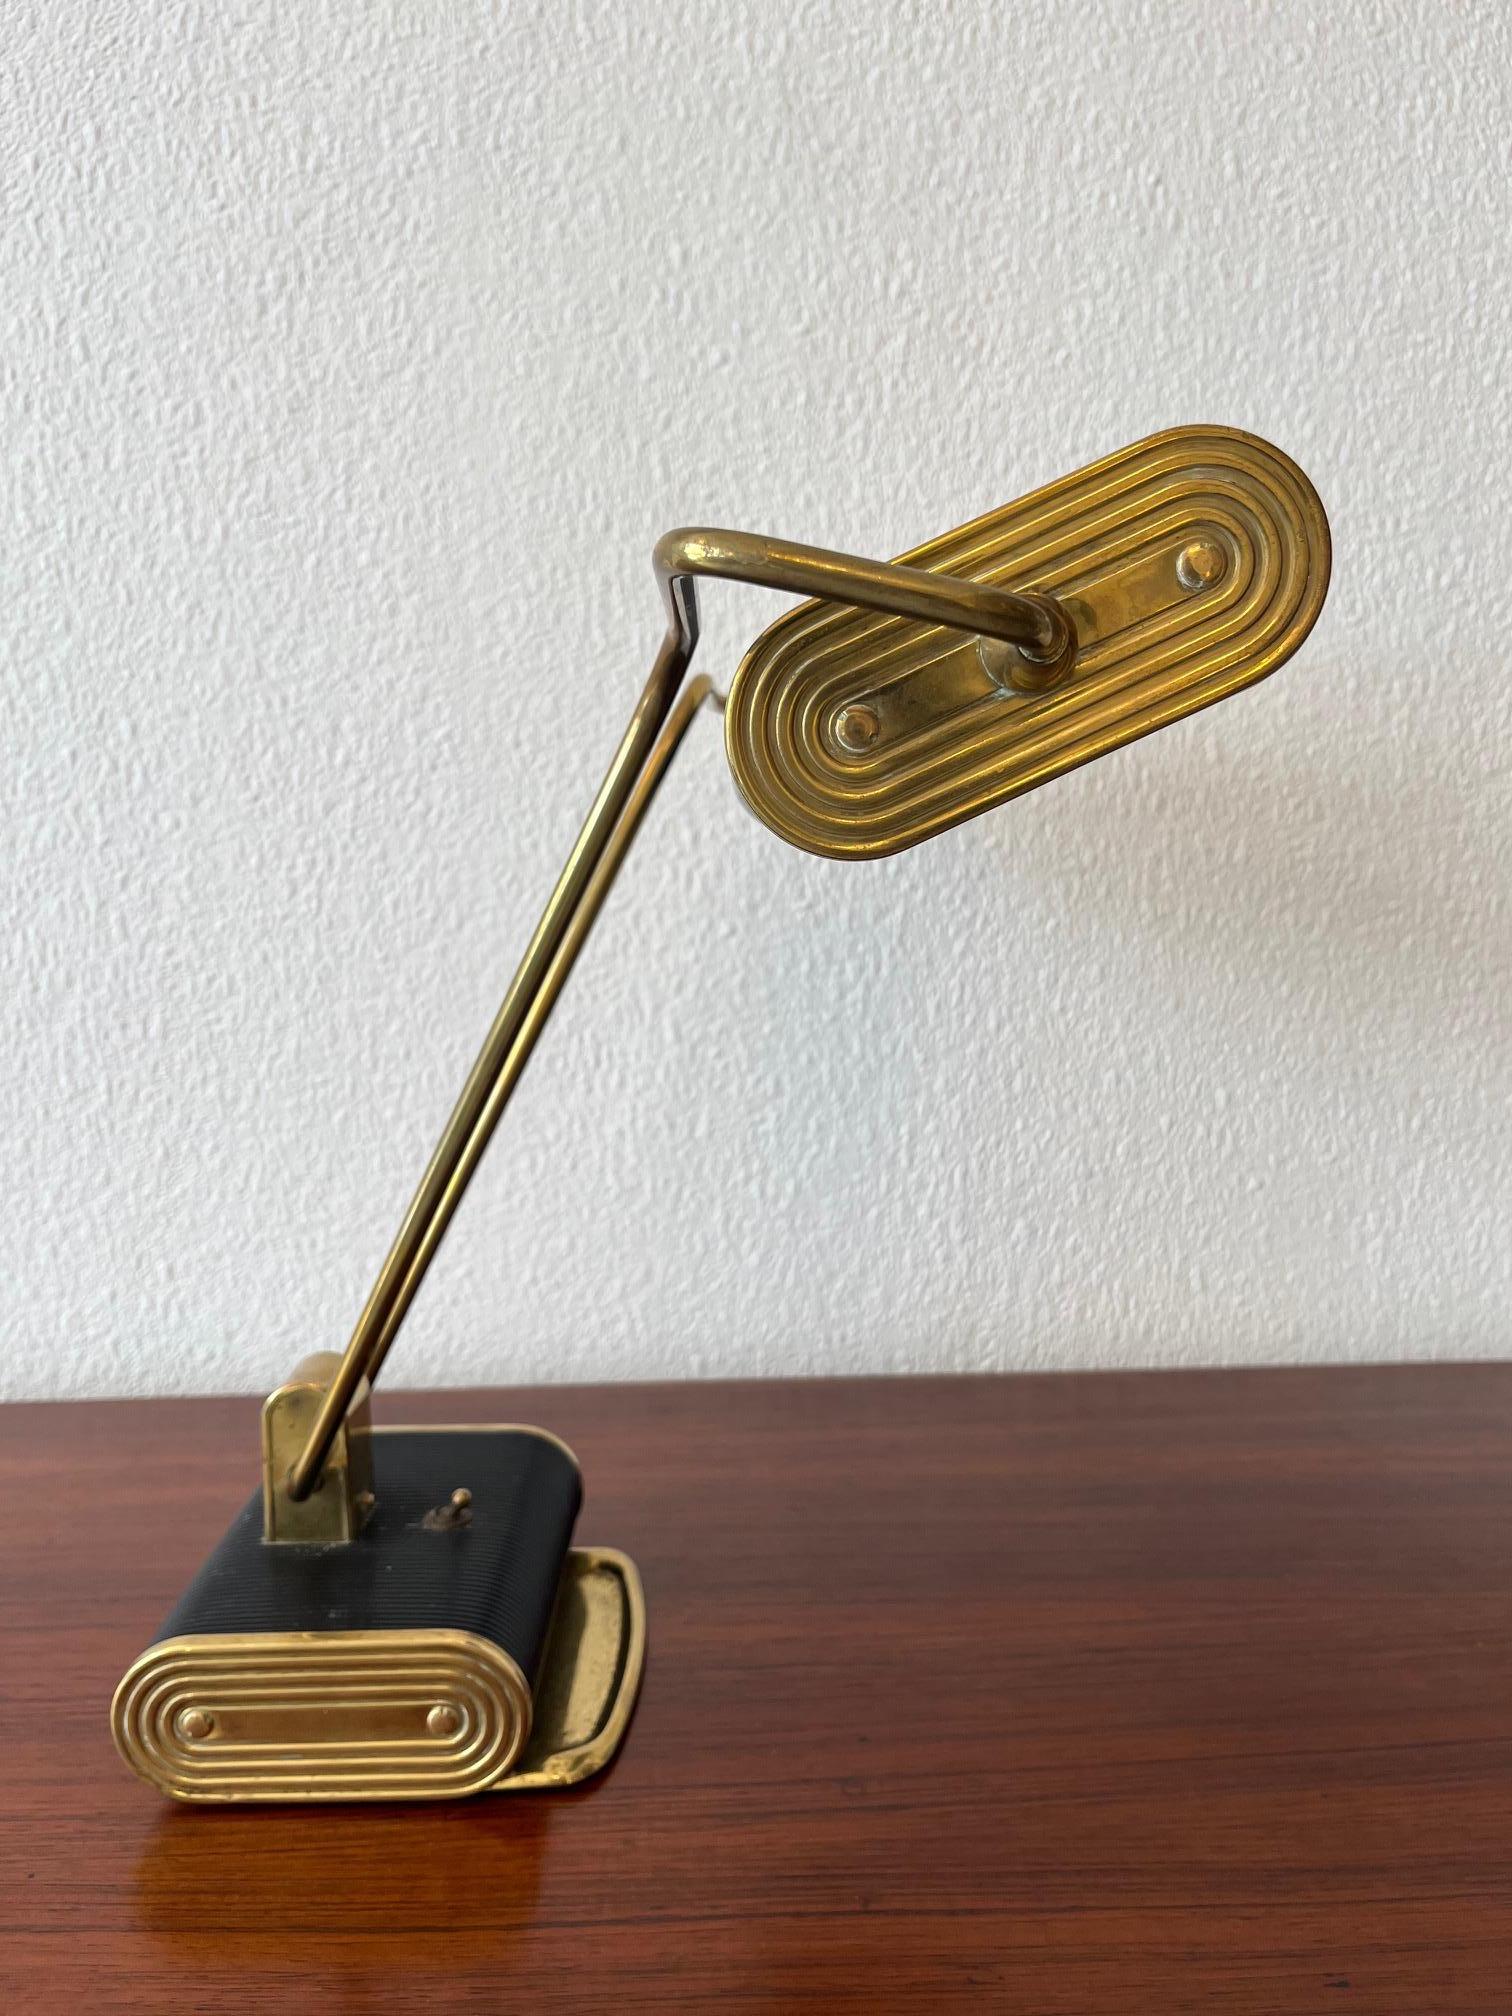 Brass & Aluminum Adjustable Desk Lamp by Eileen Gray for Jumo, France ca. 1940s For Sale 6